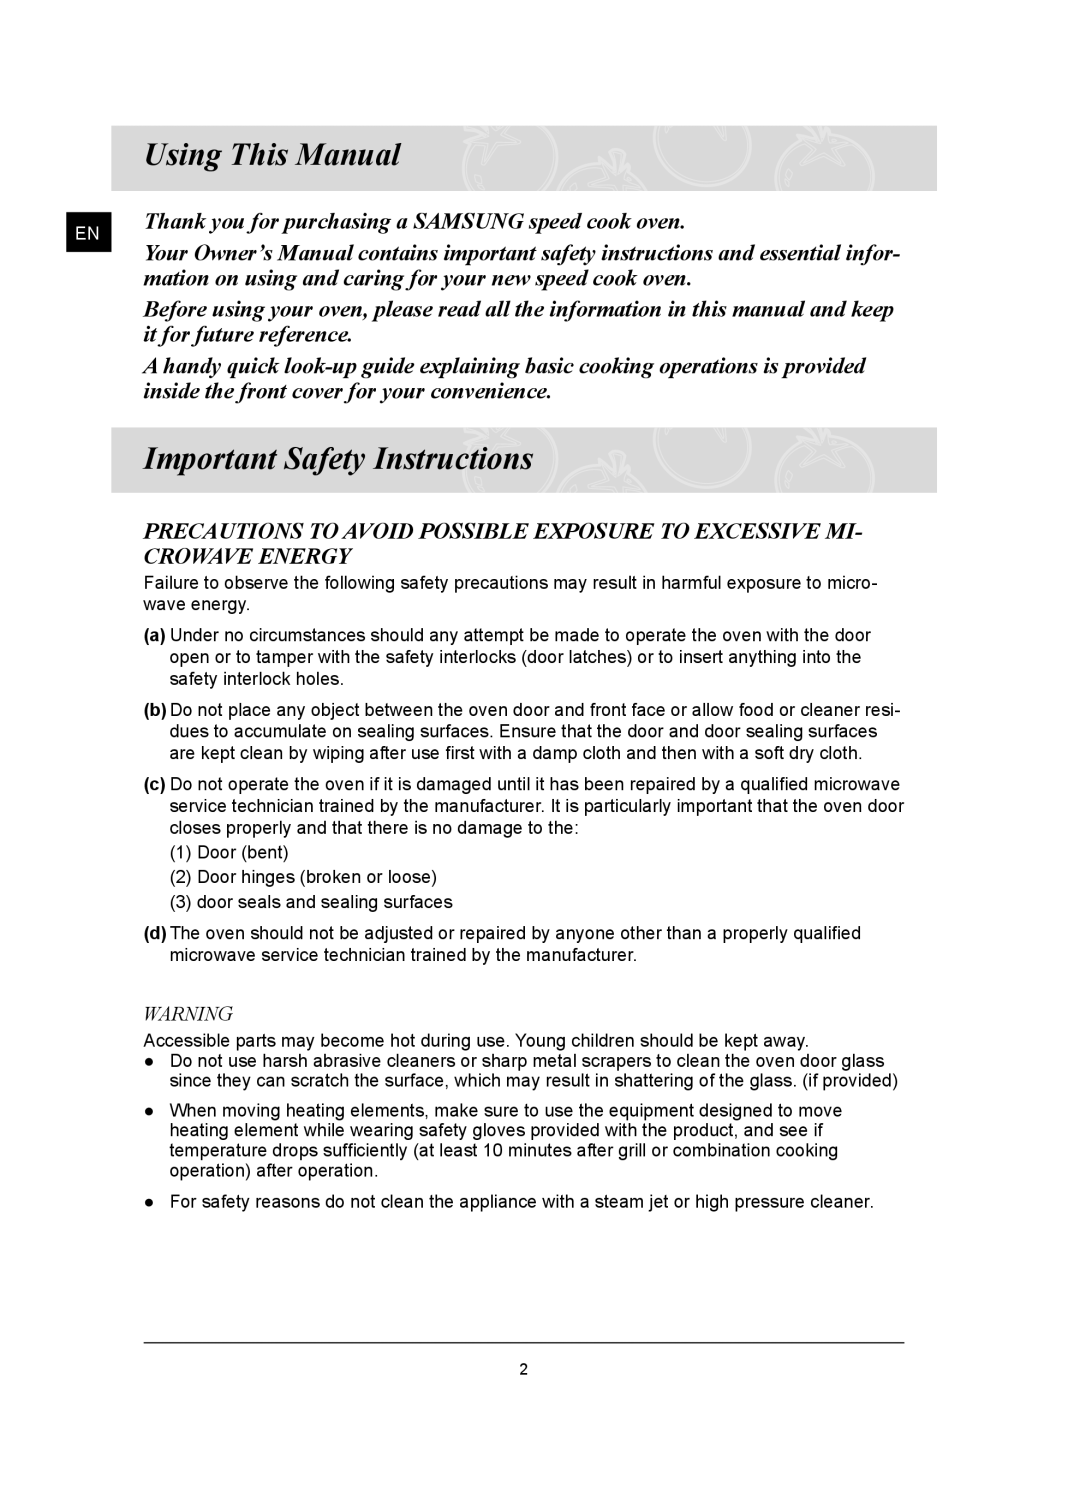 Samsung FQ159UST Using This Manual, Important Safety Instructions, Thank you for purchasing a SAMSUNG speed cook oven 